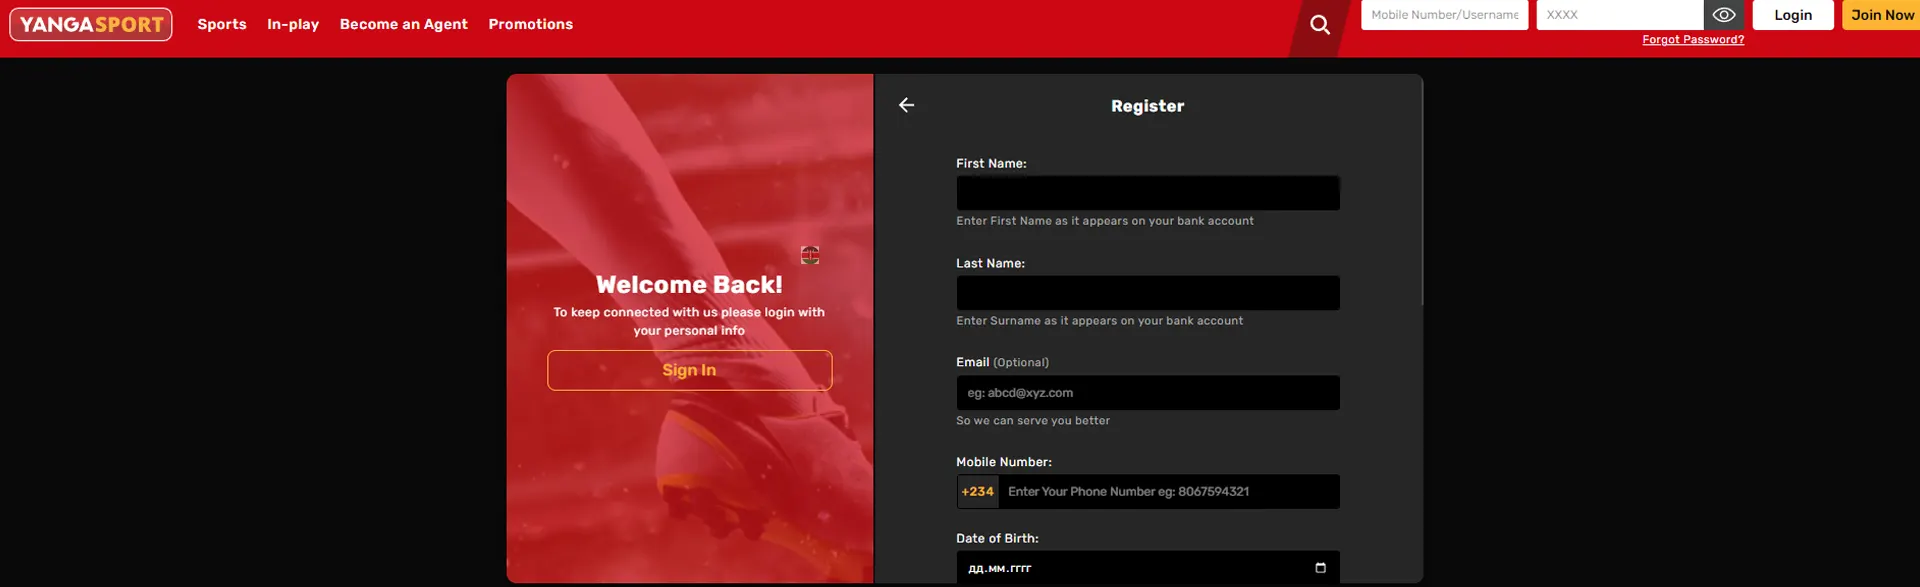 Page with registration form on Yangasport.